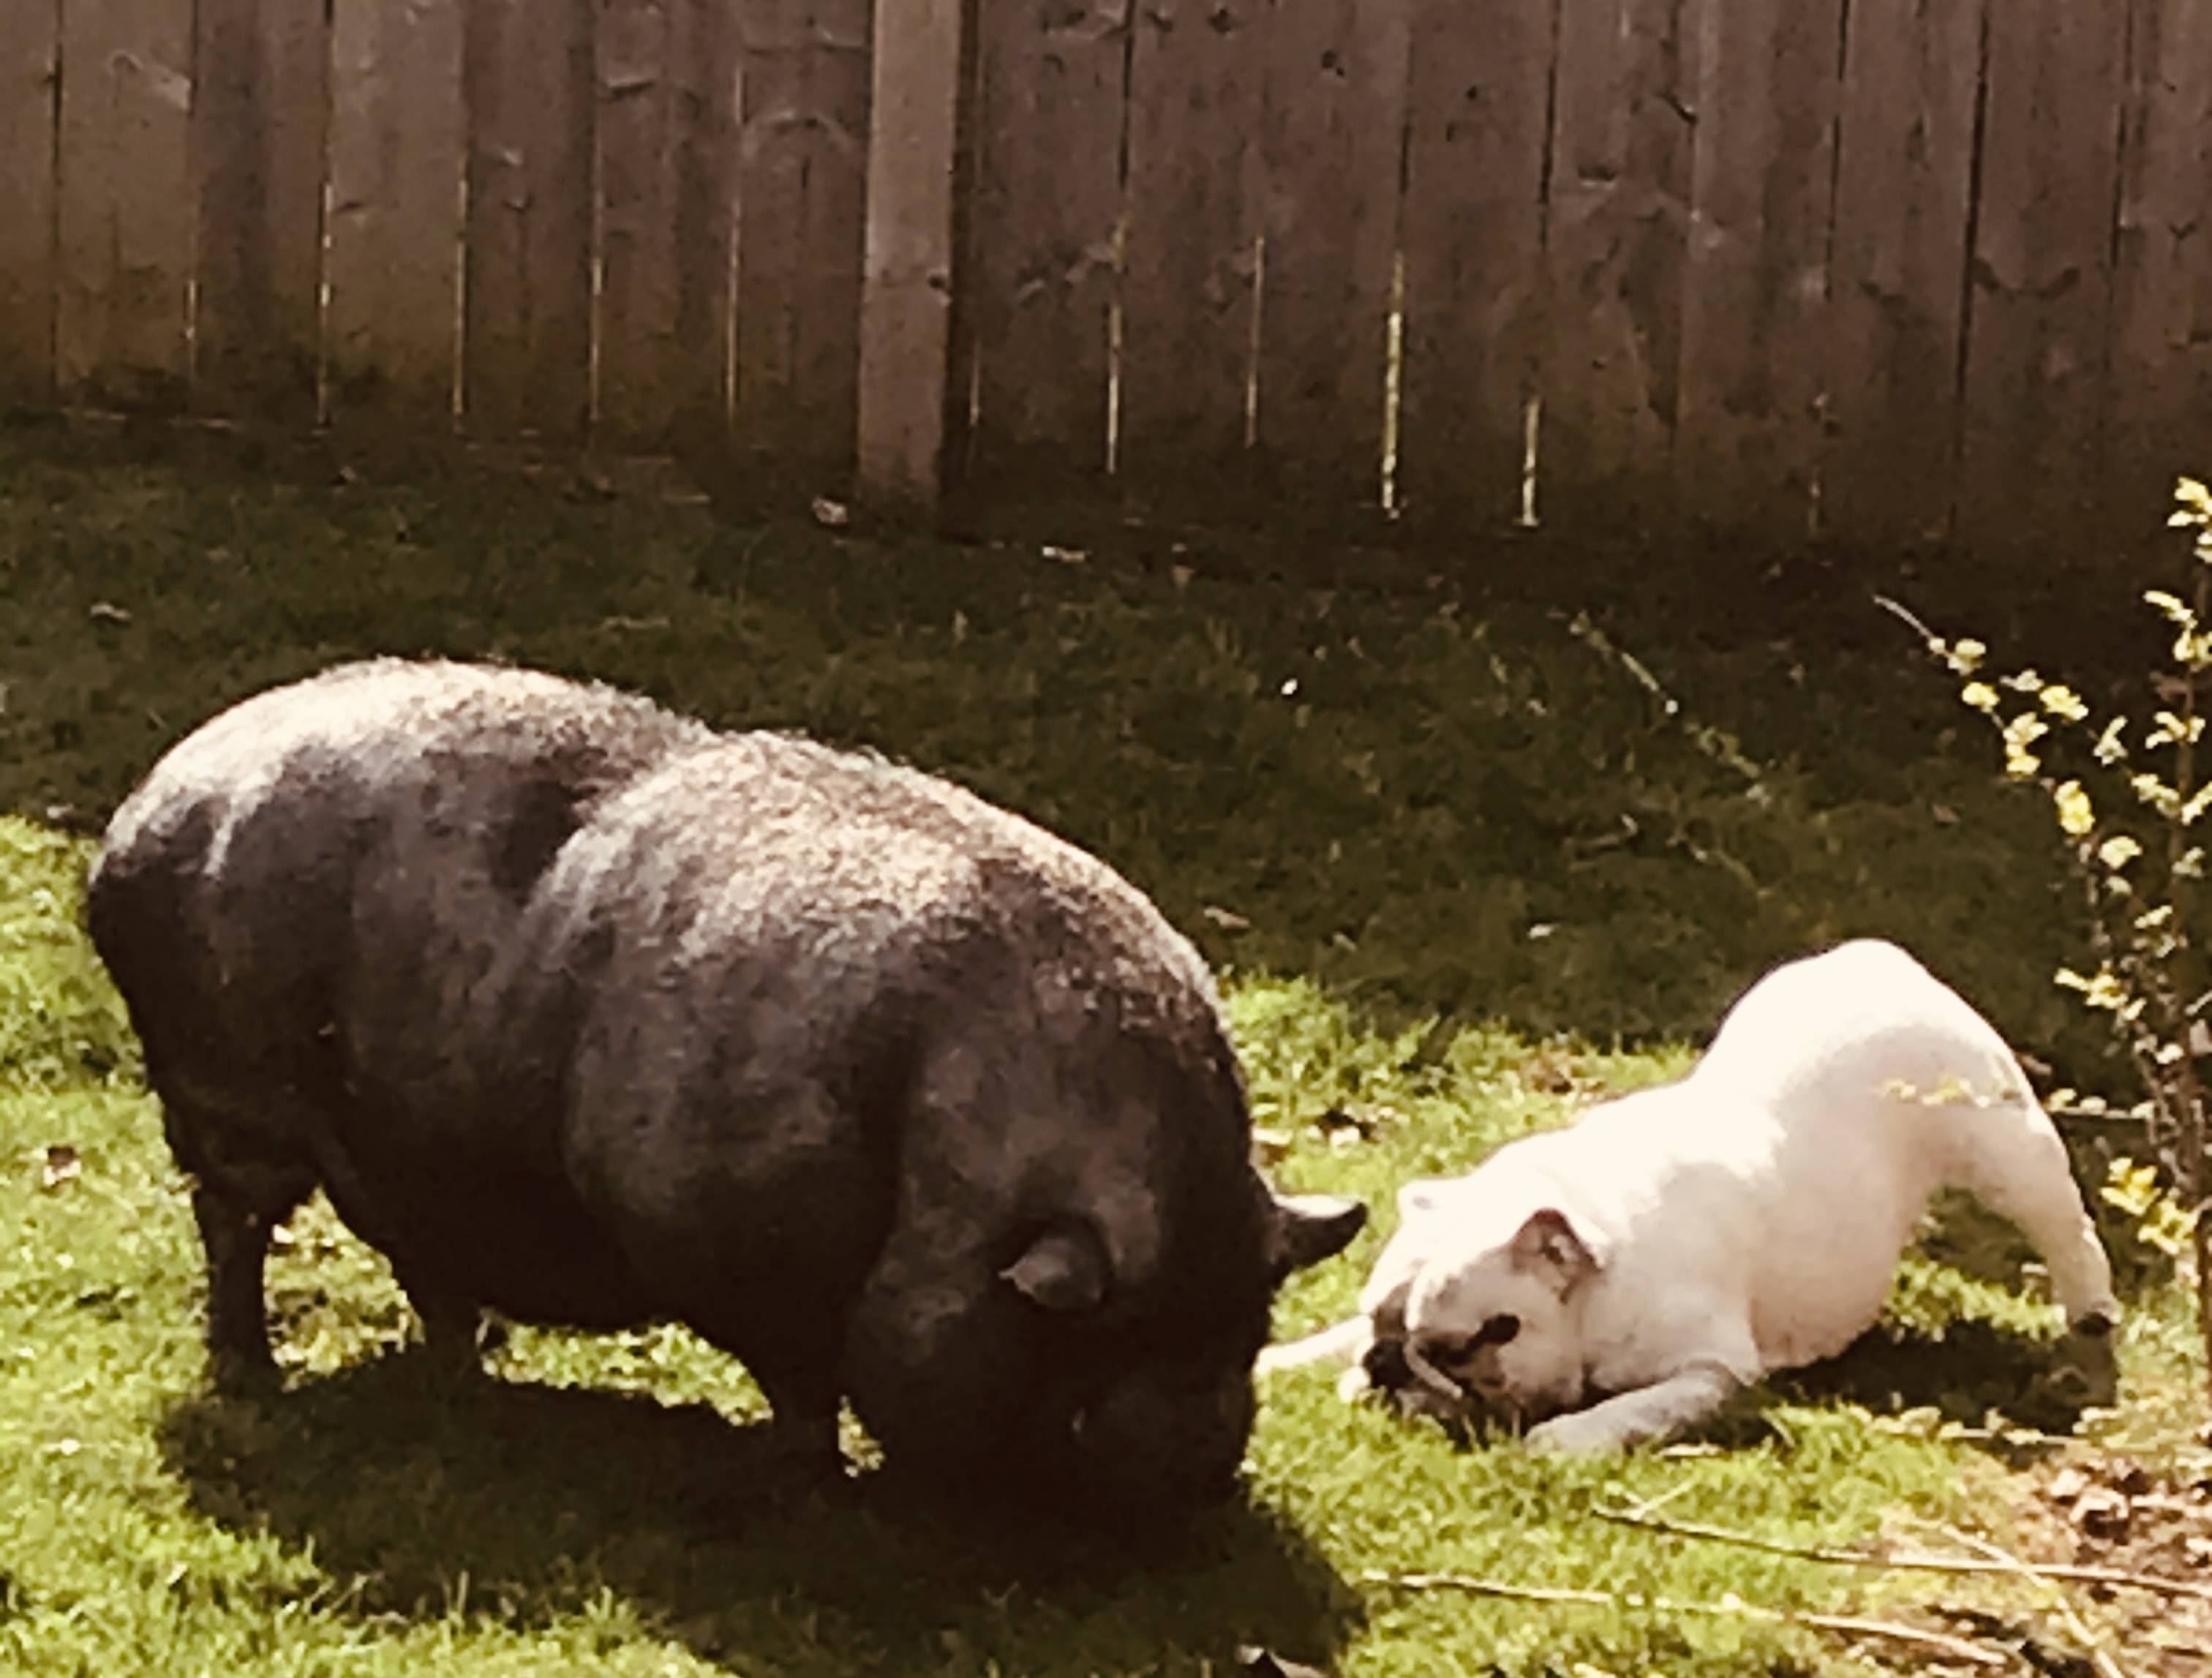 Charlie, the pig, and Prada, the dog, live in Glen Abbey | Carissa Sinclair